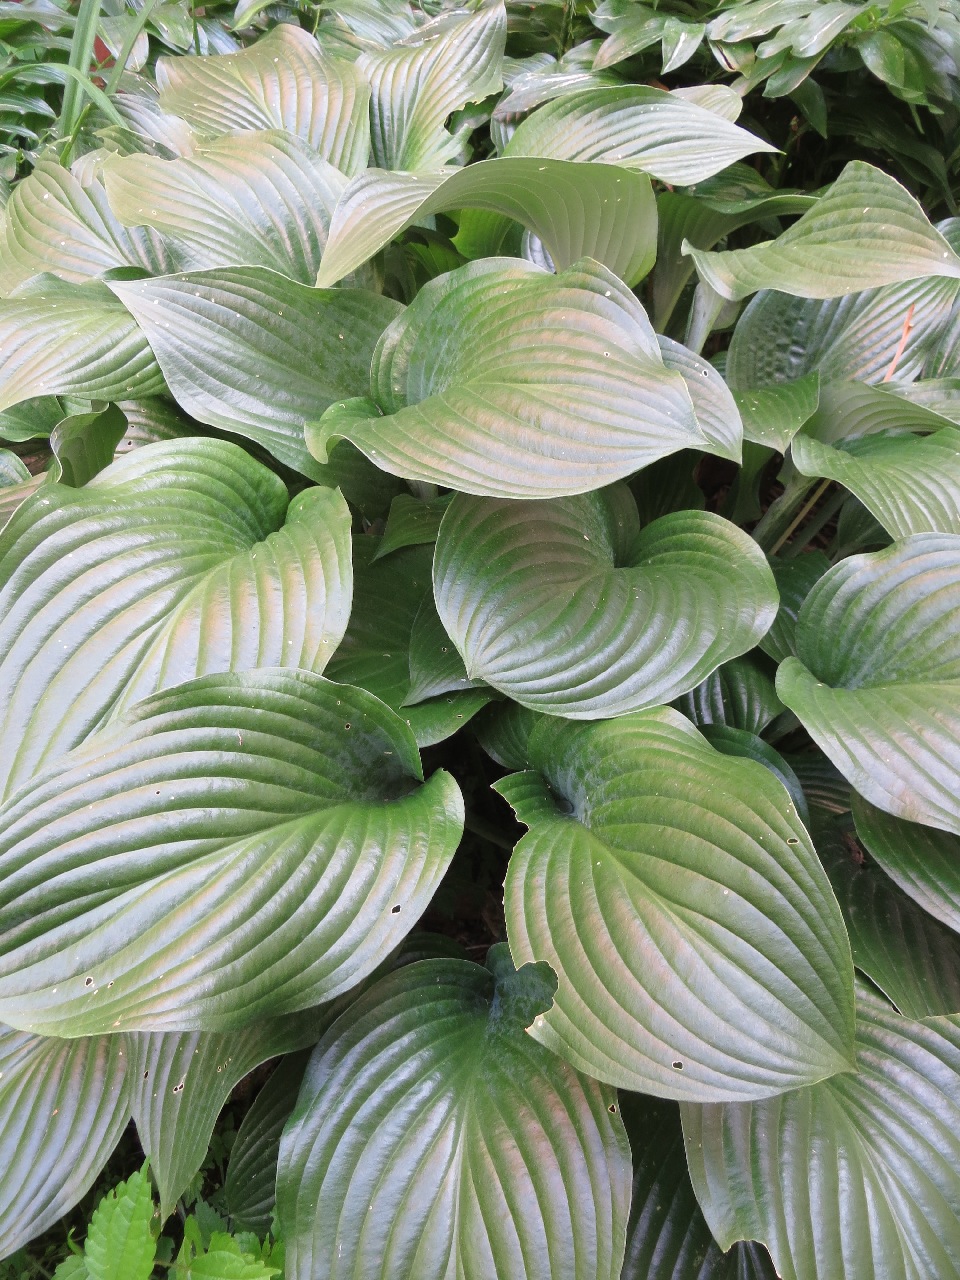 close up photo of a dark green hosta: ovate leaves bigger than your spread hand, the ribs of the veins curving back in to a point at the tip of the leaf. They're so shiny they almost look like plastic. A few leaves have been nibbled around the edges.